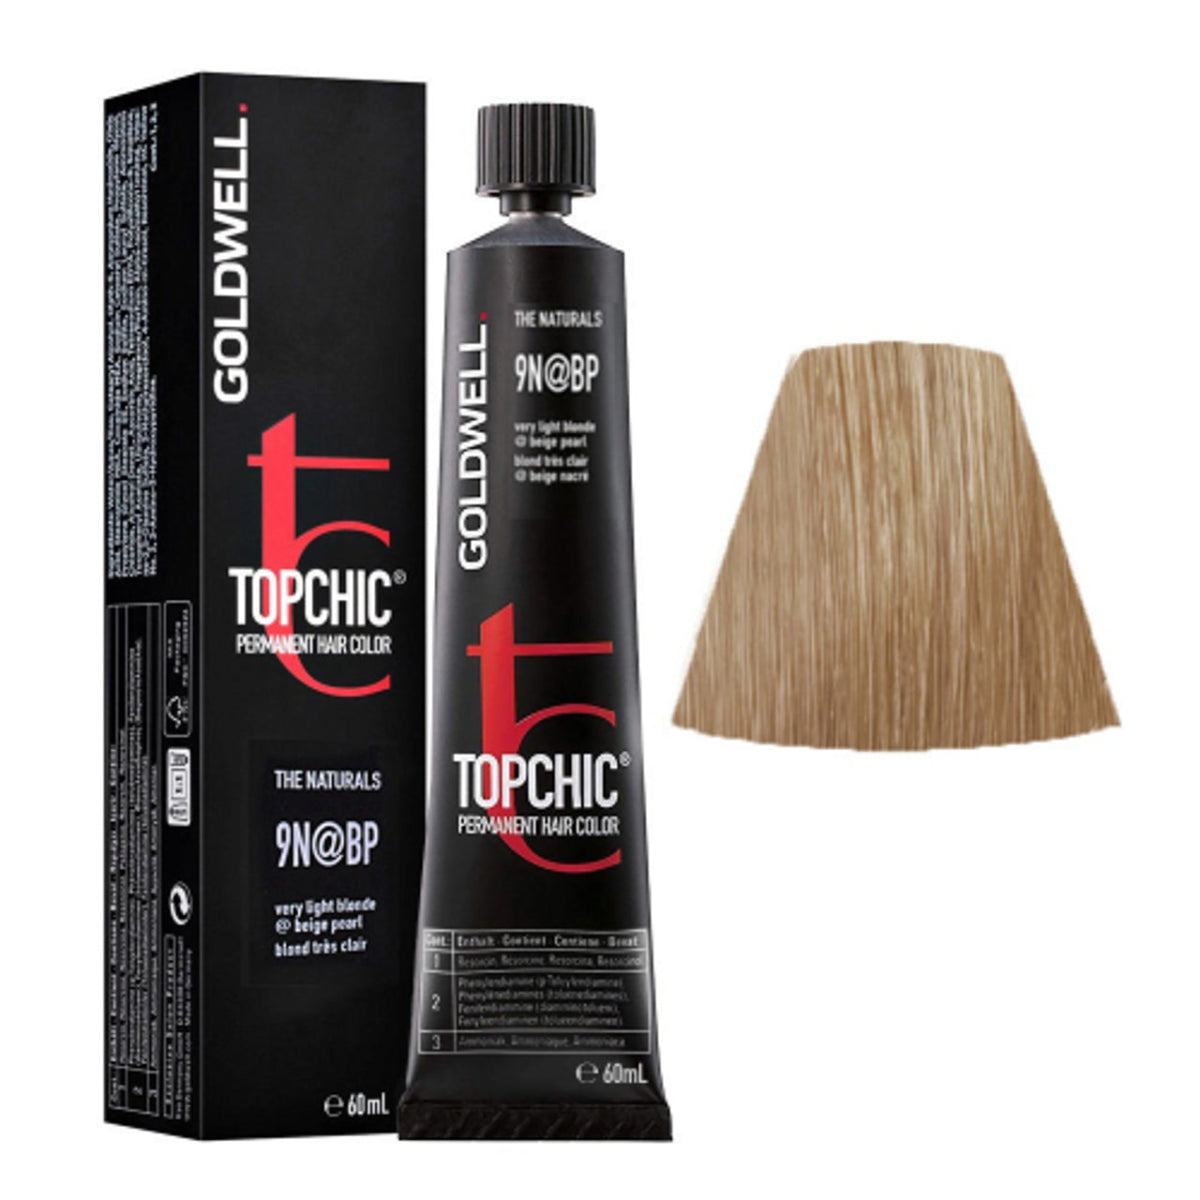 Goldwell Topchic Tube 60ml - MORE COLOURS - Southwestsix Cosmetics Goldwell Topchic Tube 60ml - MORE COLOURS - Hair Dyes Goldwell Southwestsix Cosmetics 9N@BP Goldwell Topchic Tube 60ml - MORE COLOURS -